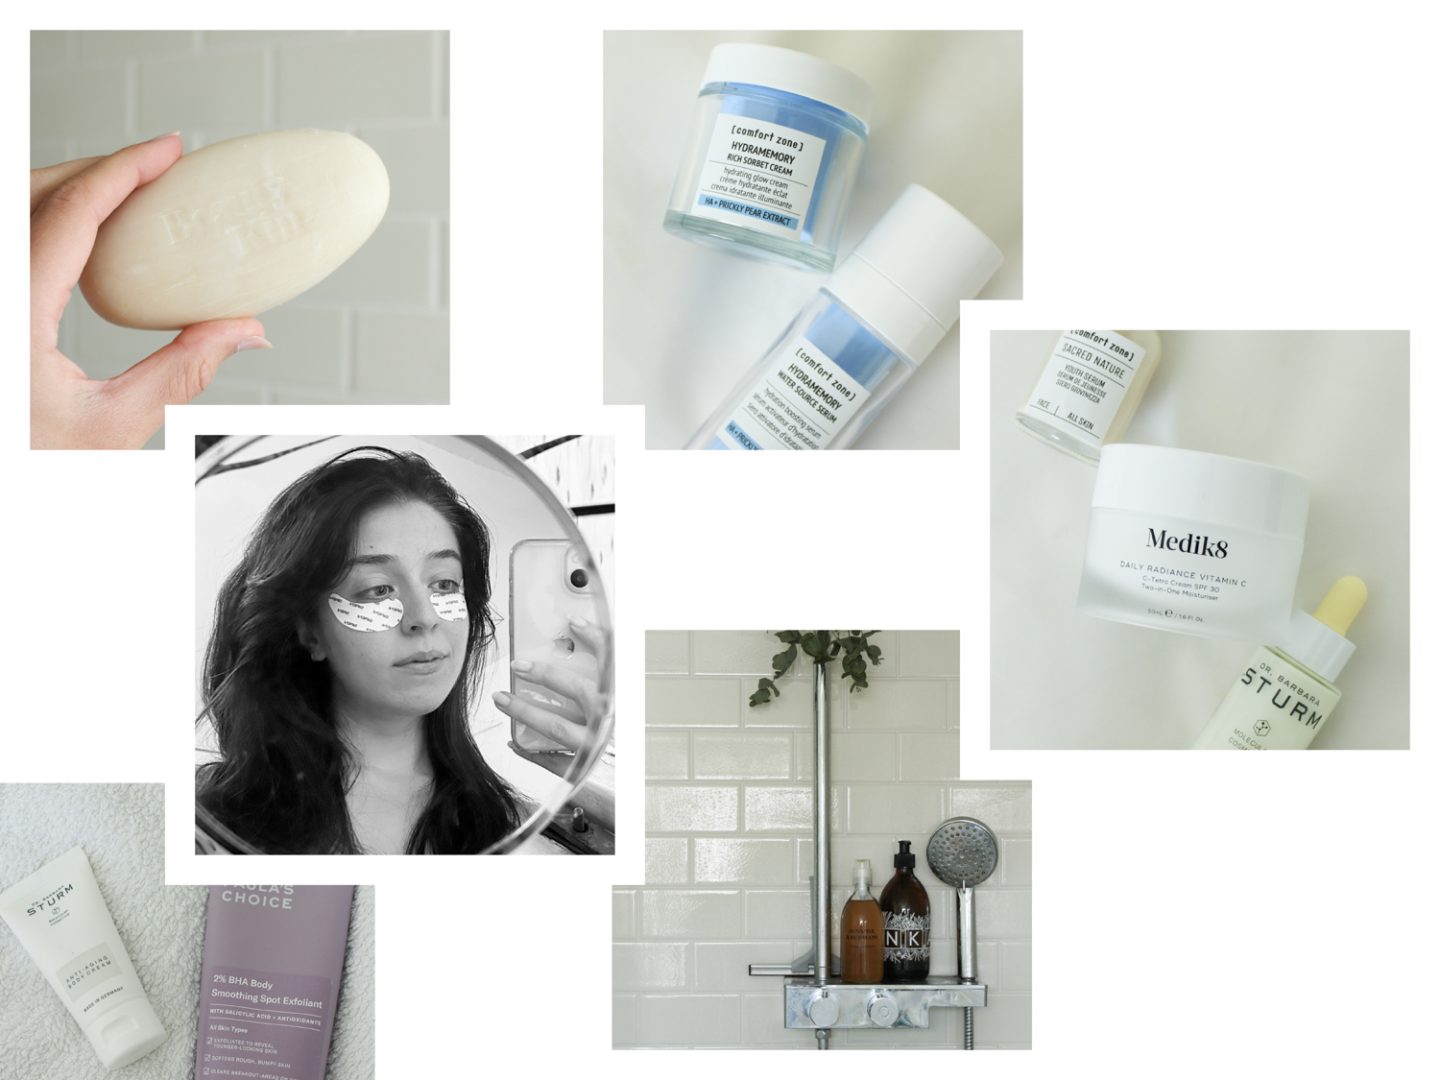 Gallery of summer skincare products and Besma taking selfie